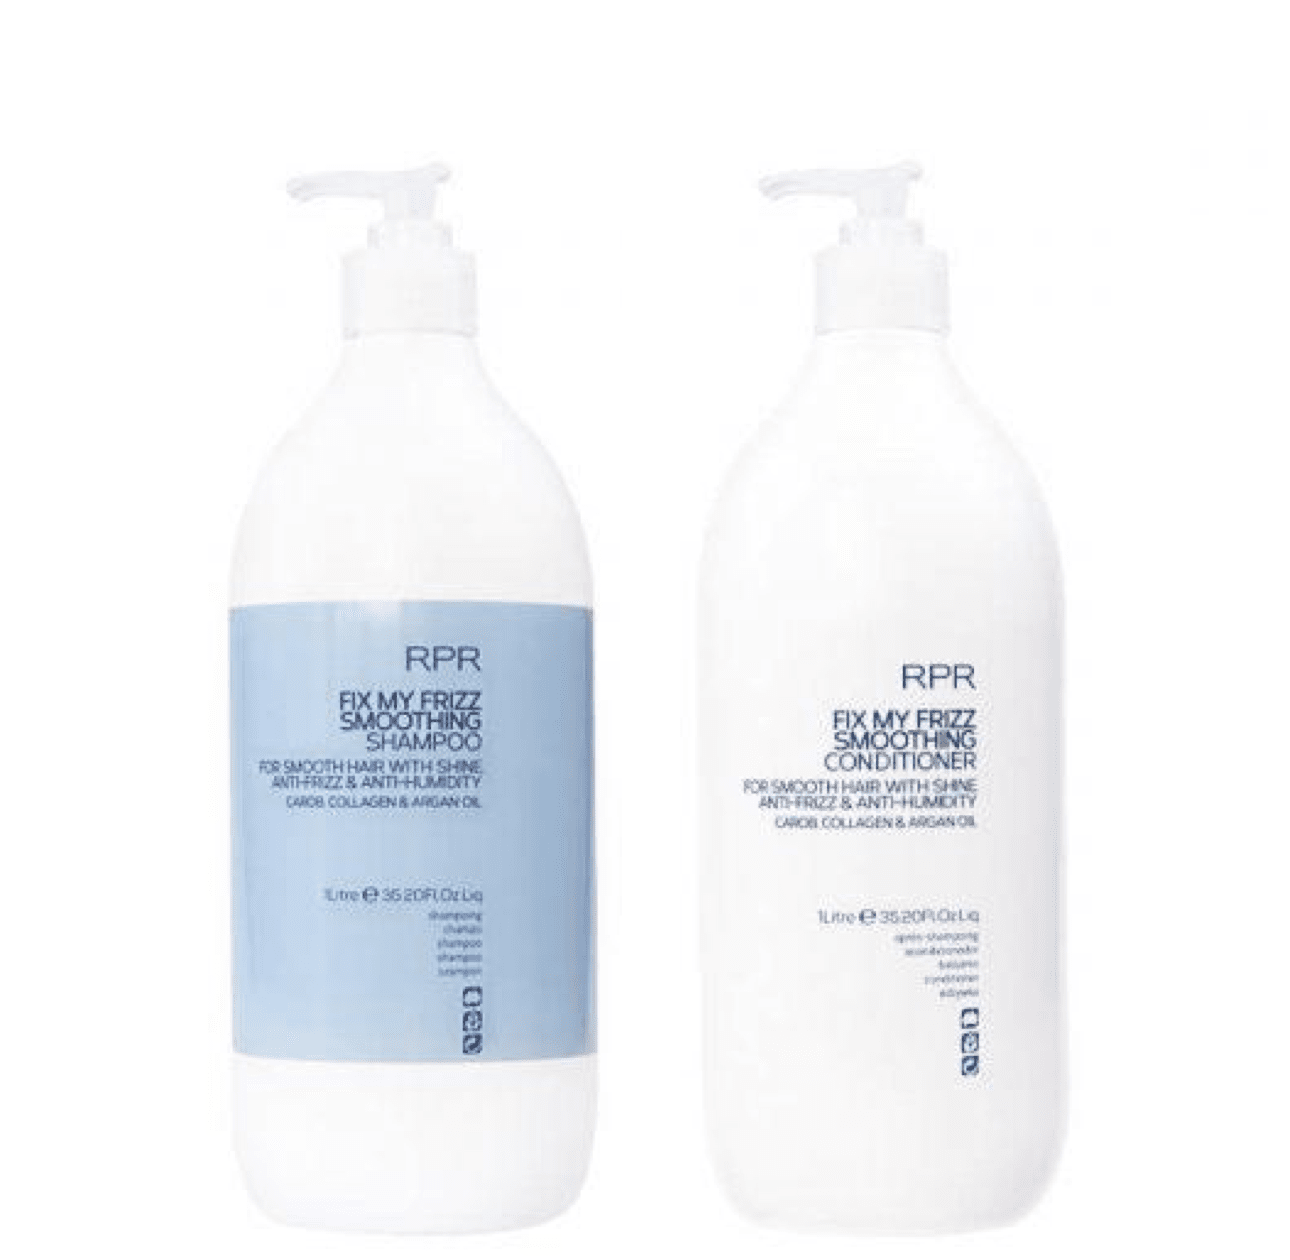 RPR Fix My Frizz Smoothing Shampoo and Conditioner 1000ml Duo Bundle